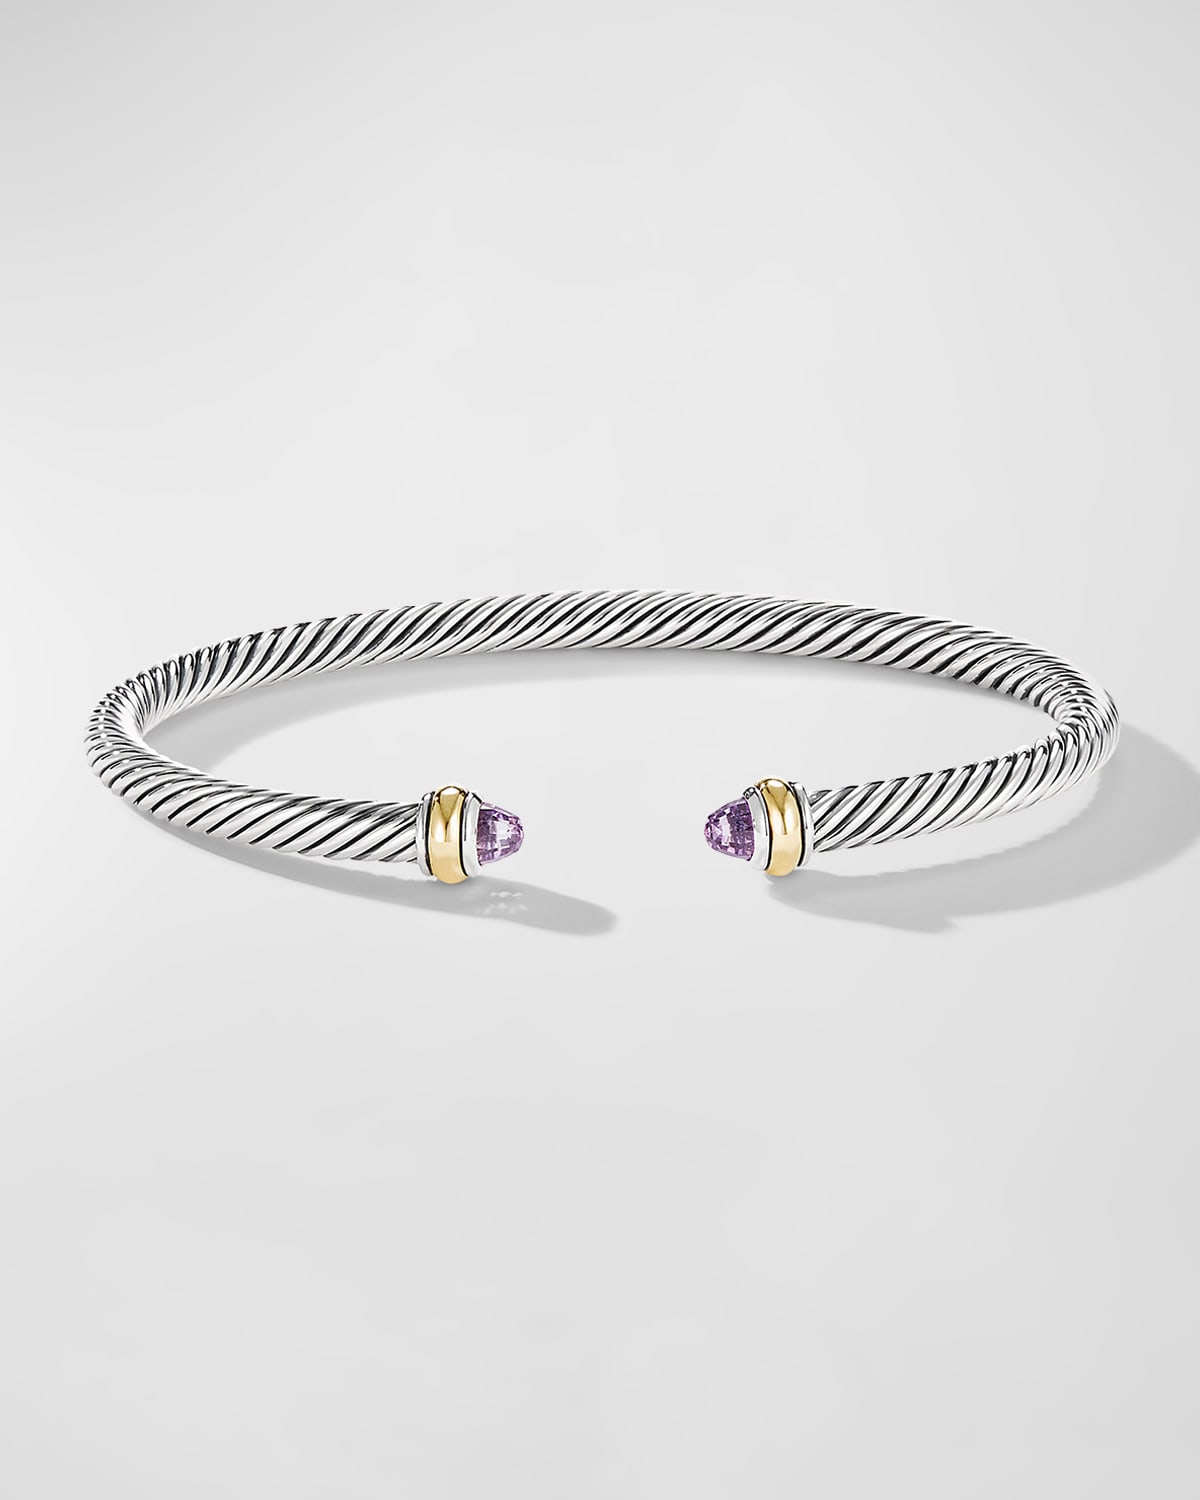 David Yurman Sterling Silver & 18k Yellow Gold Cable Cuff Bracelet With Amethyst In Purple/silver